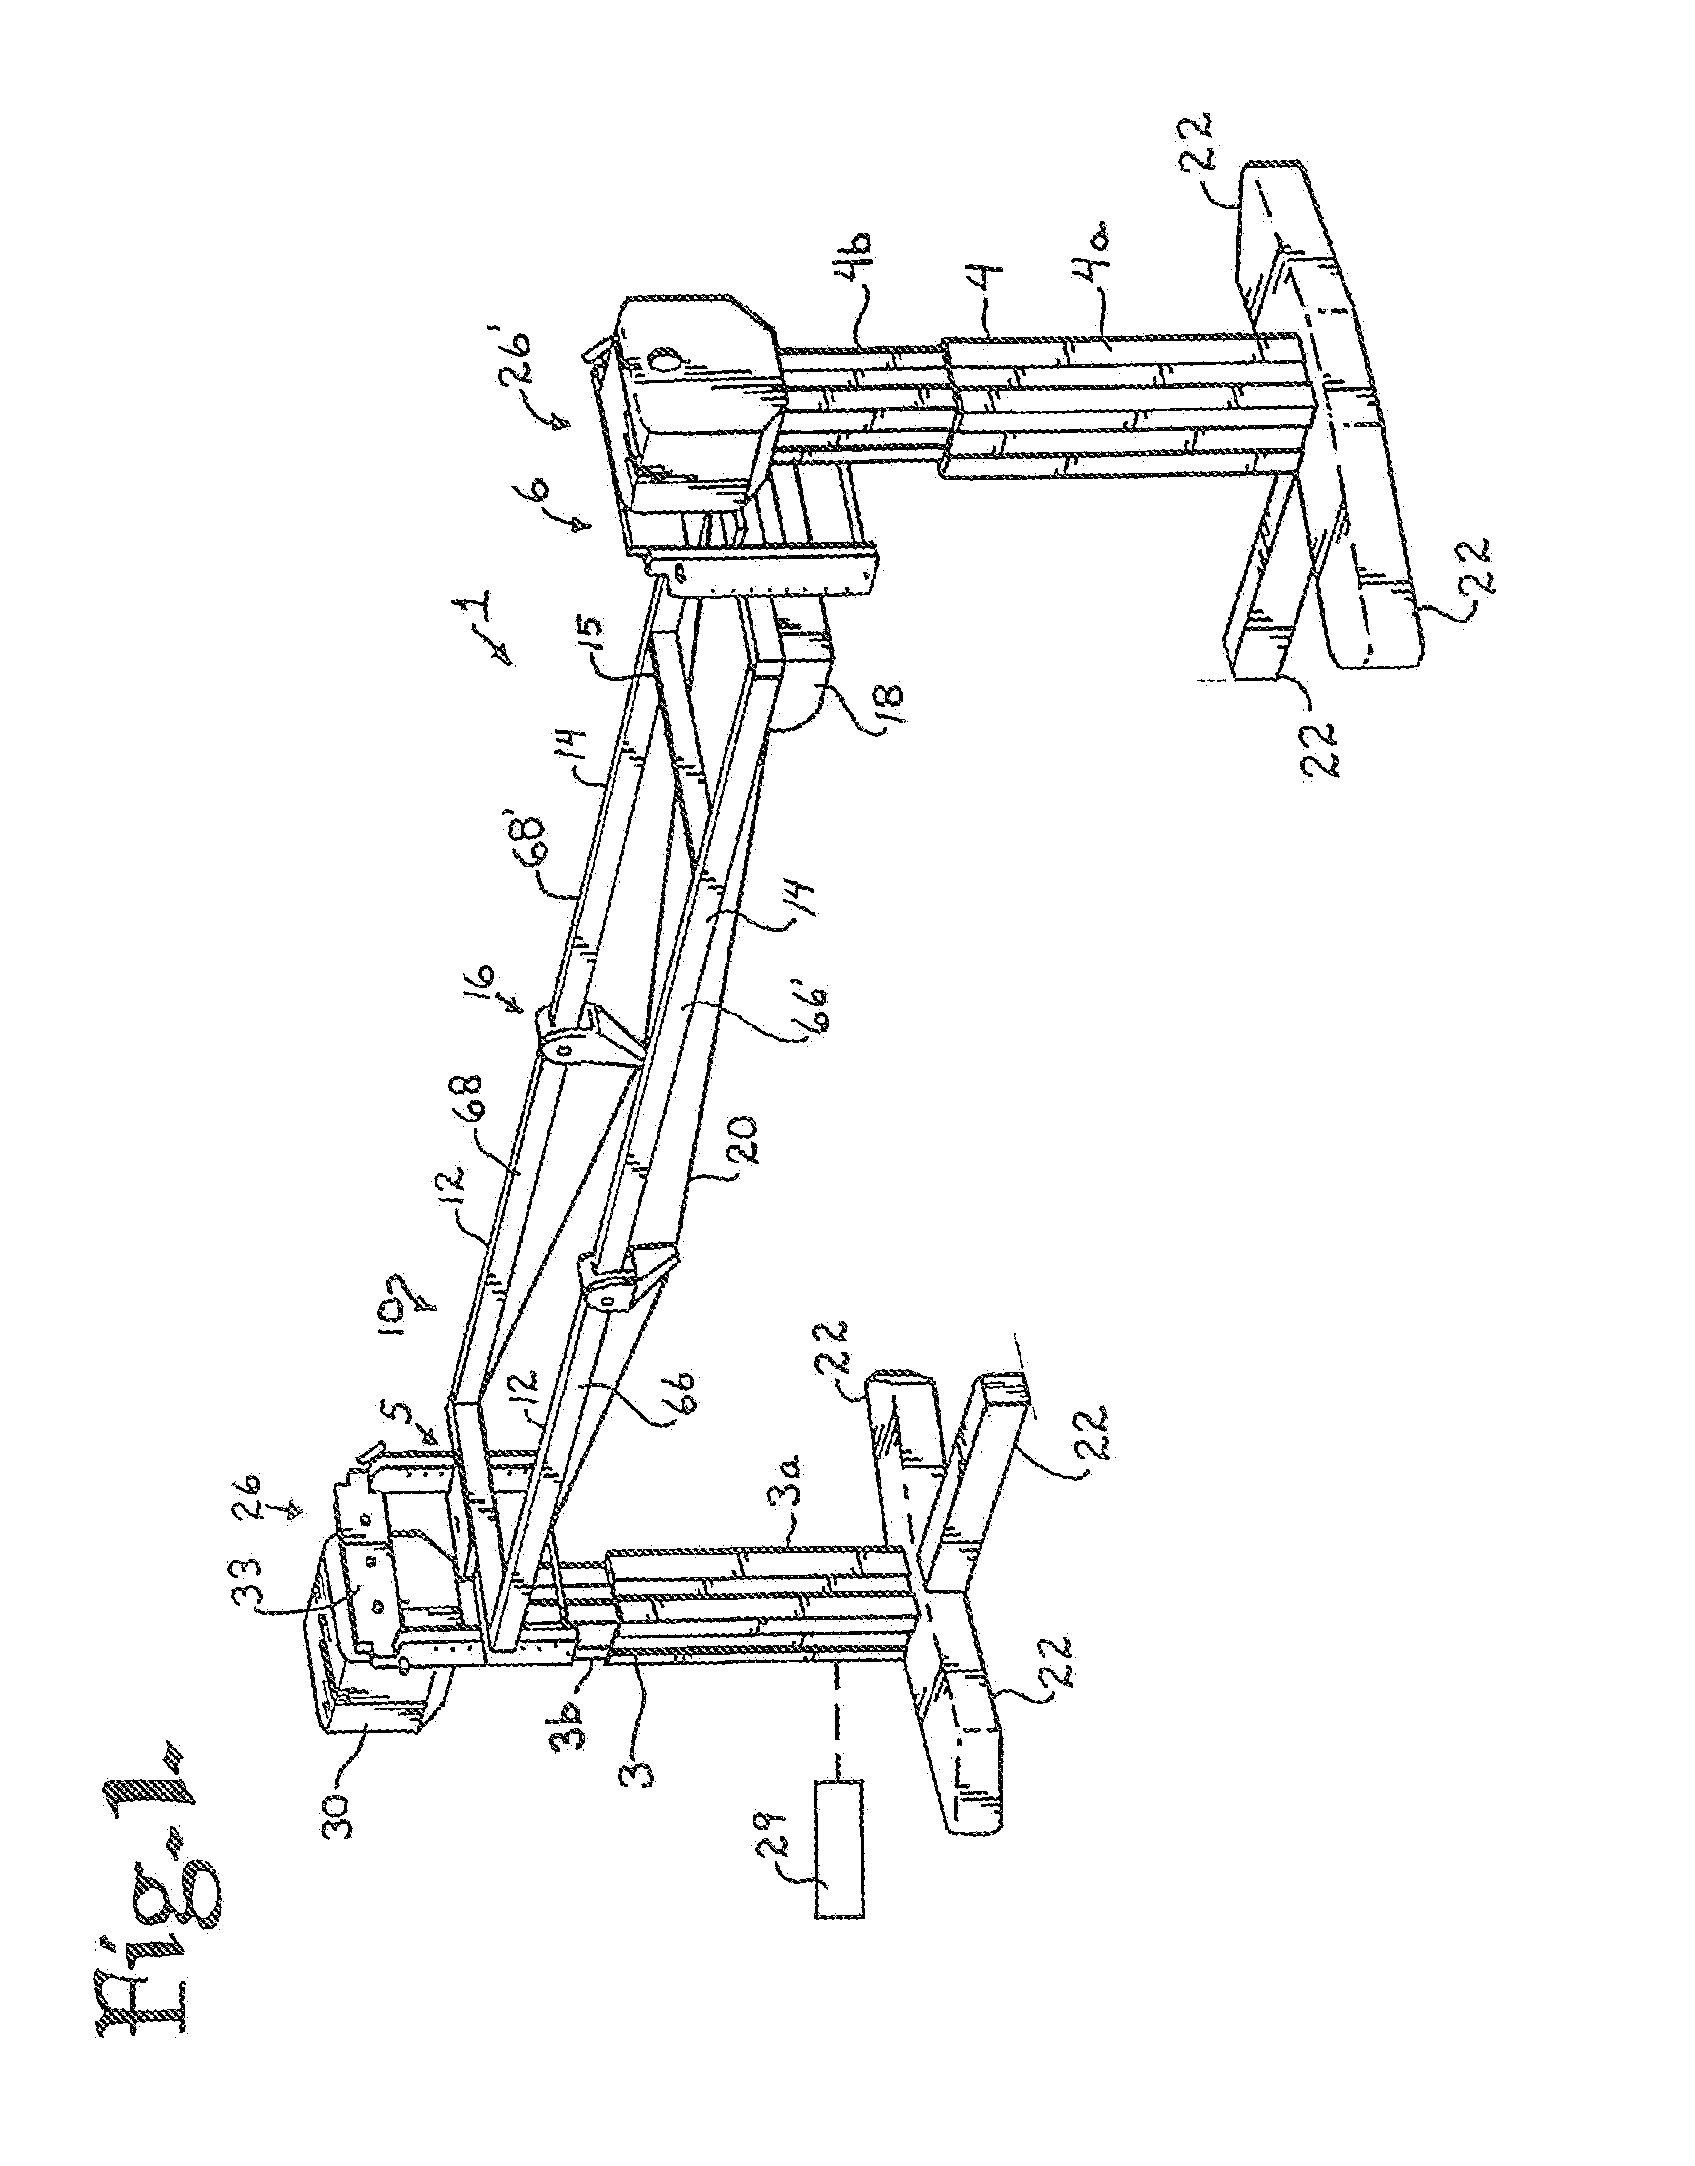 Cantilevered patient positioning support structure